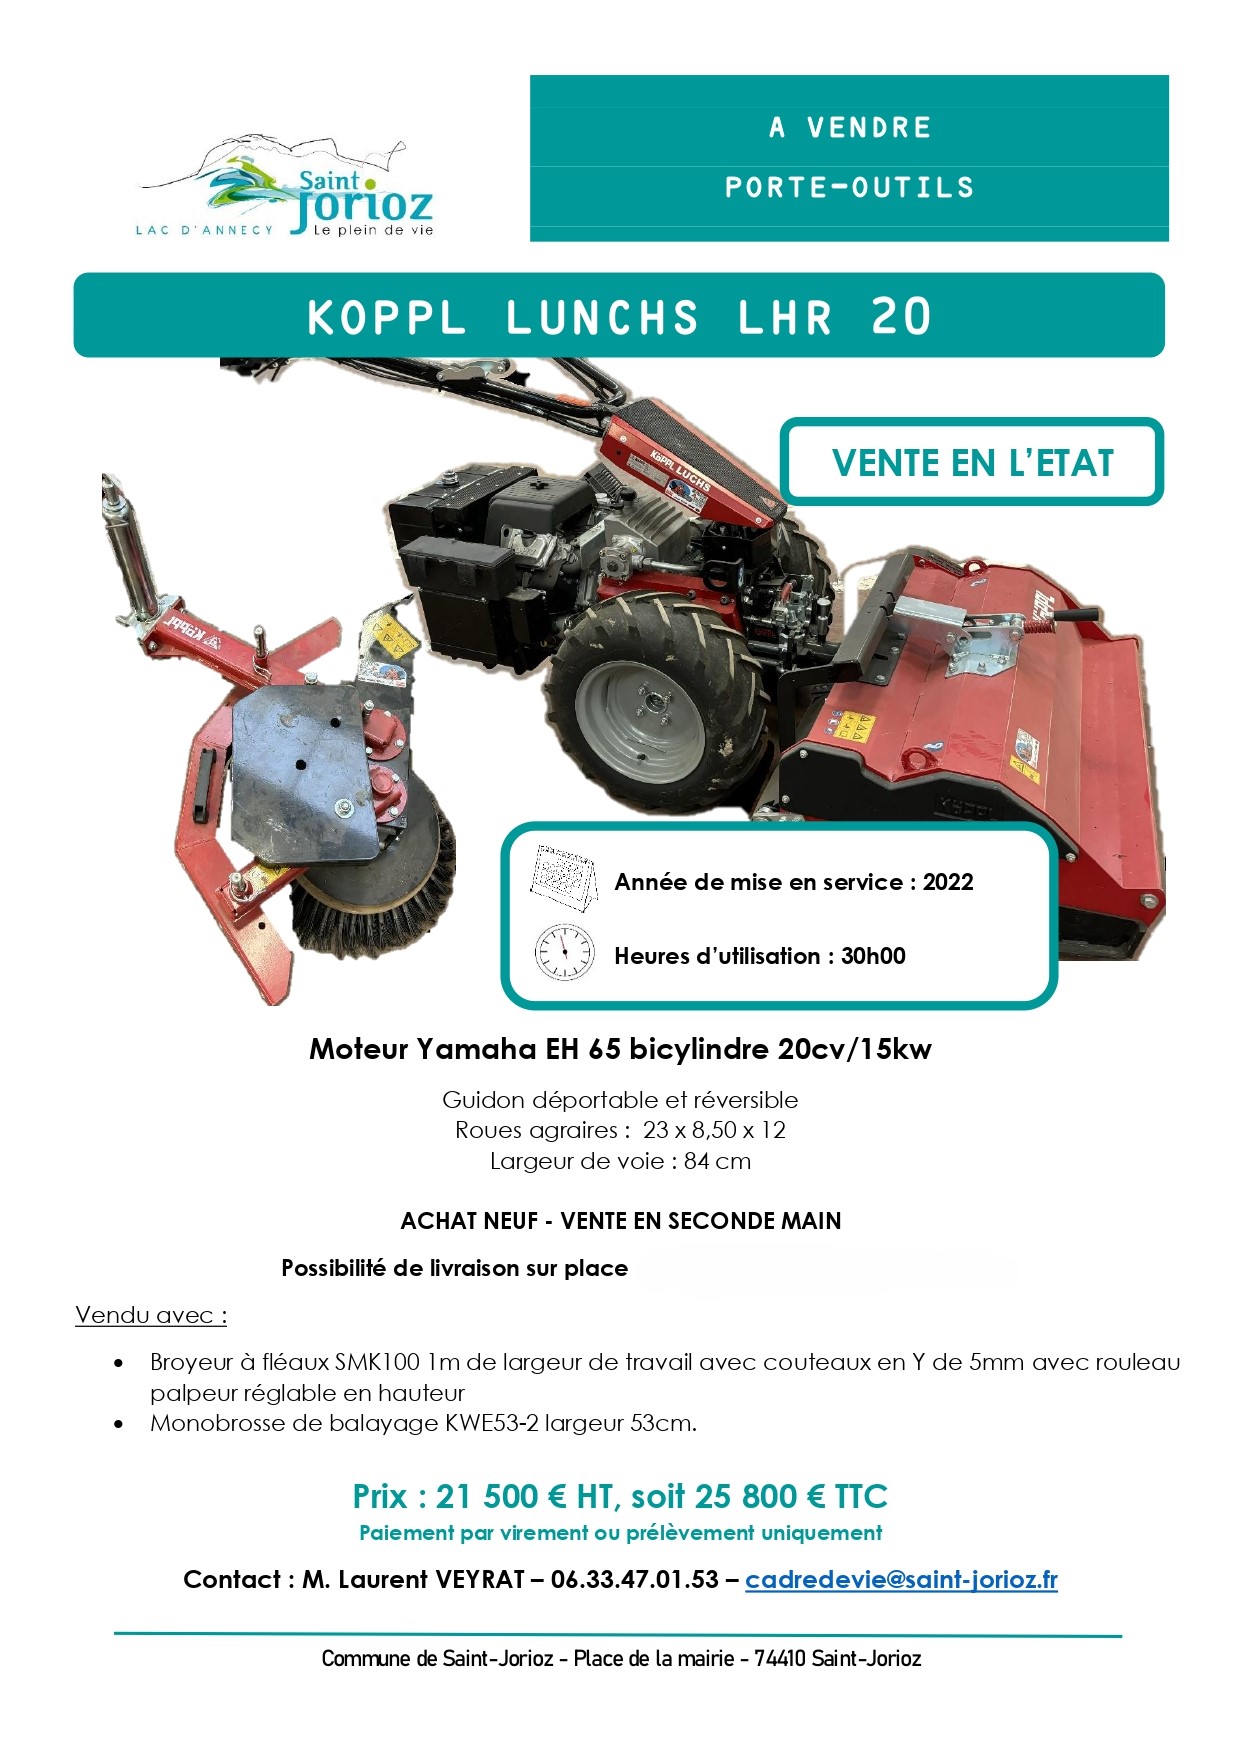 A VENDRE KOPPL LUNCHS LHR 20_page-0001.jpg